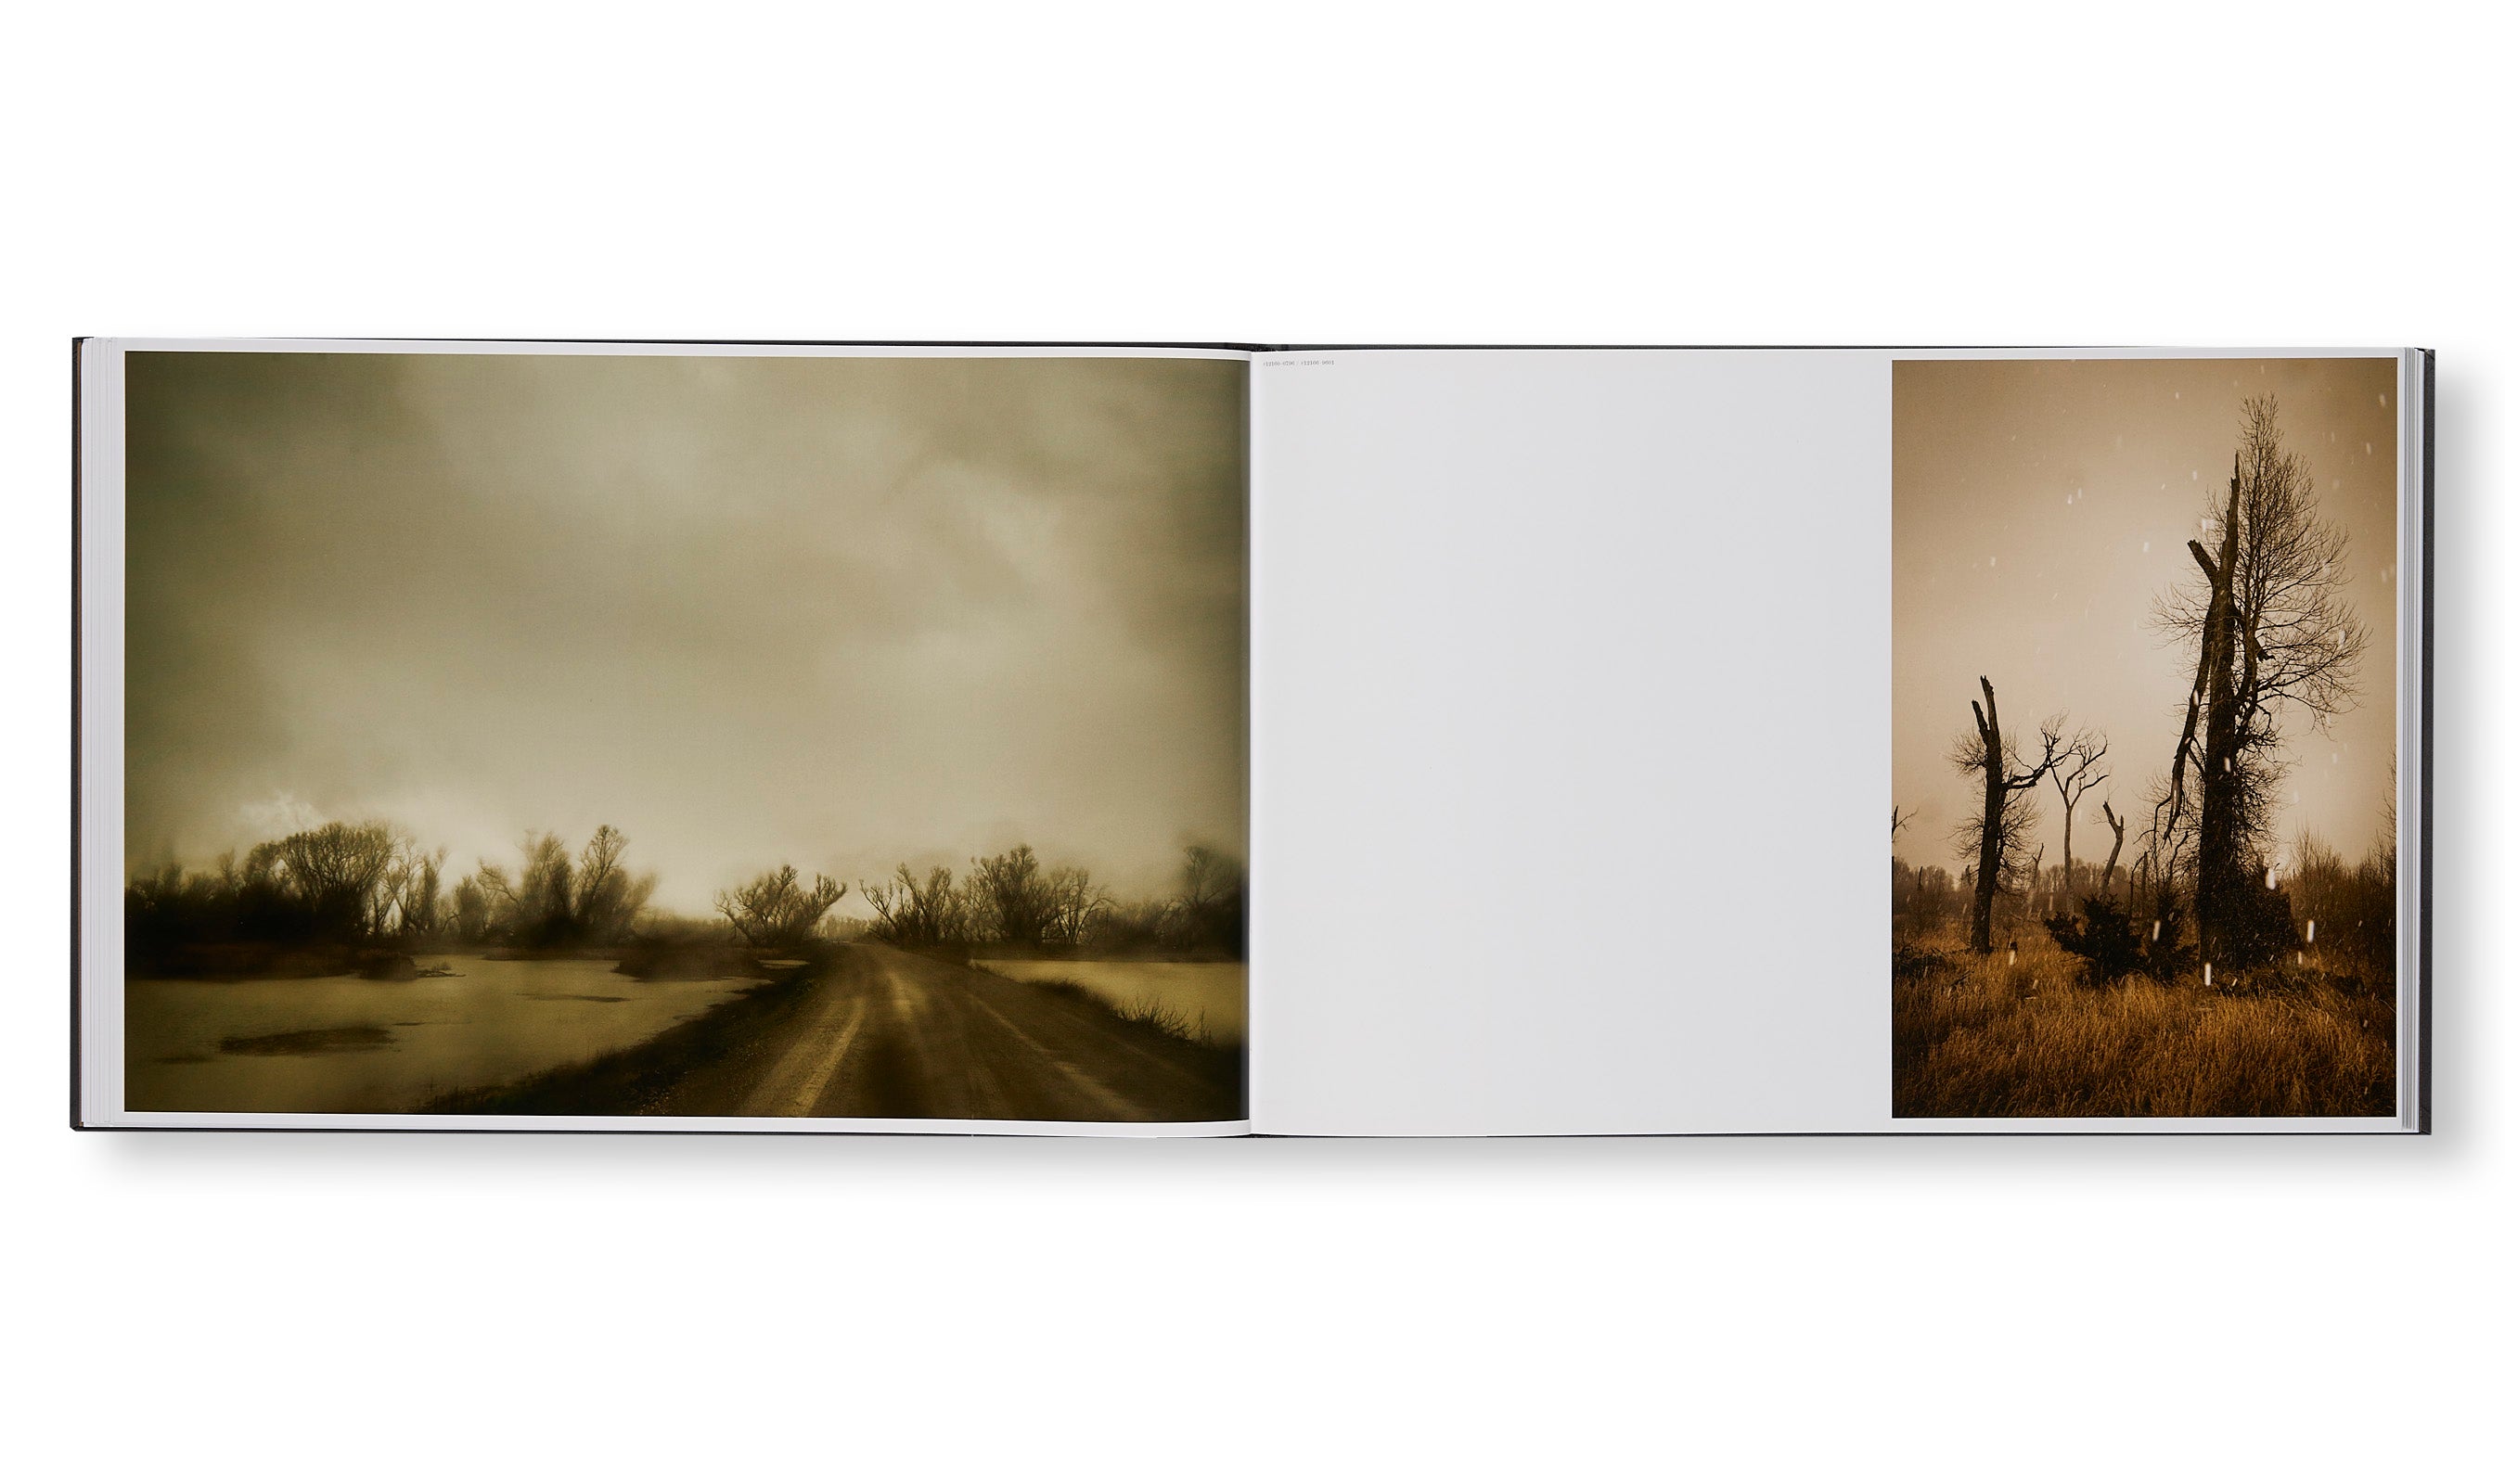 THE END SENDS ADVANCE WARNING by Todd Hido